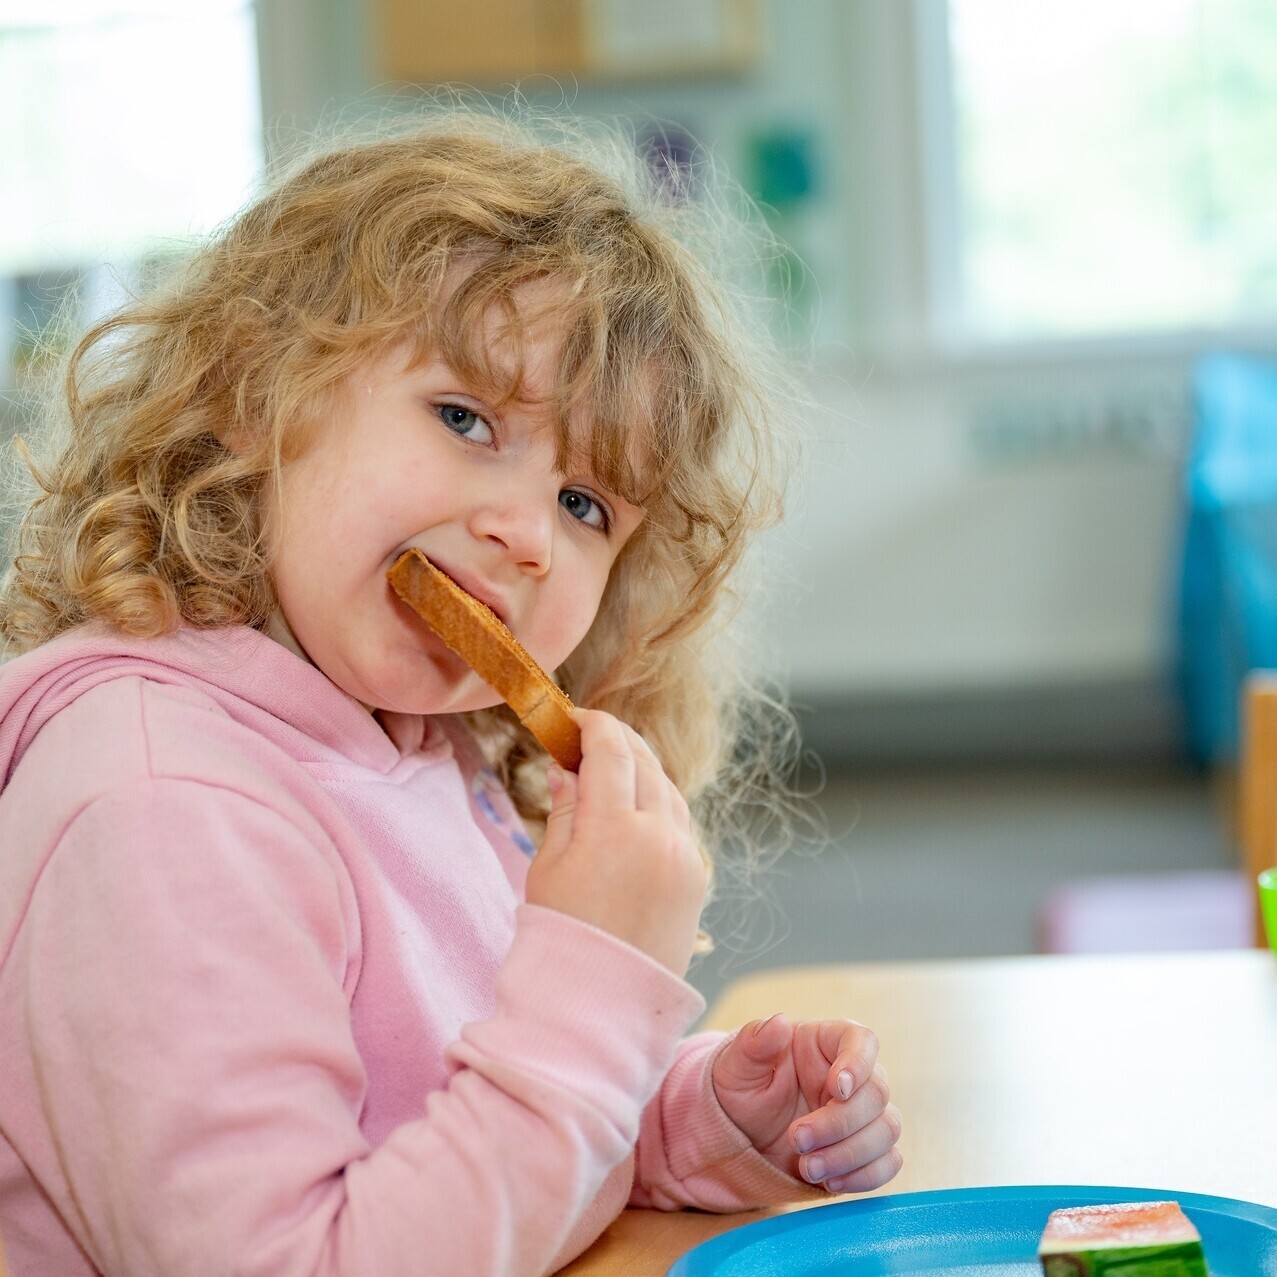 A young girl eating a piece of toast